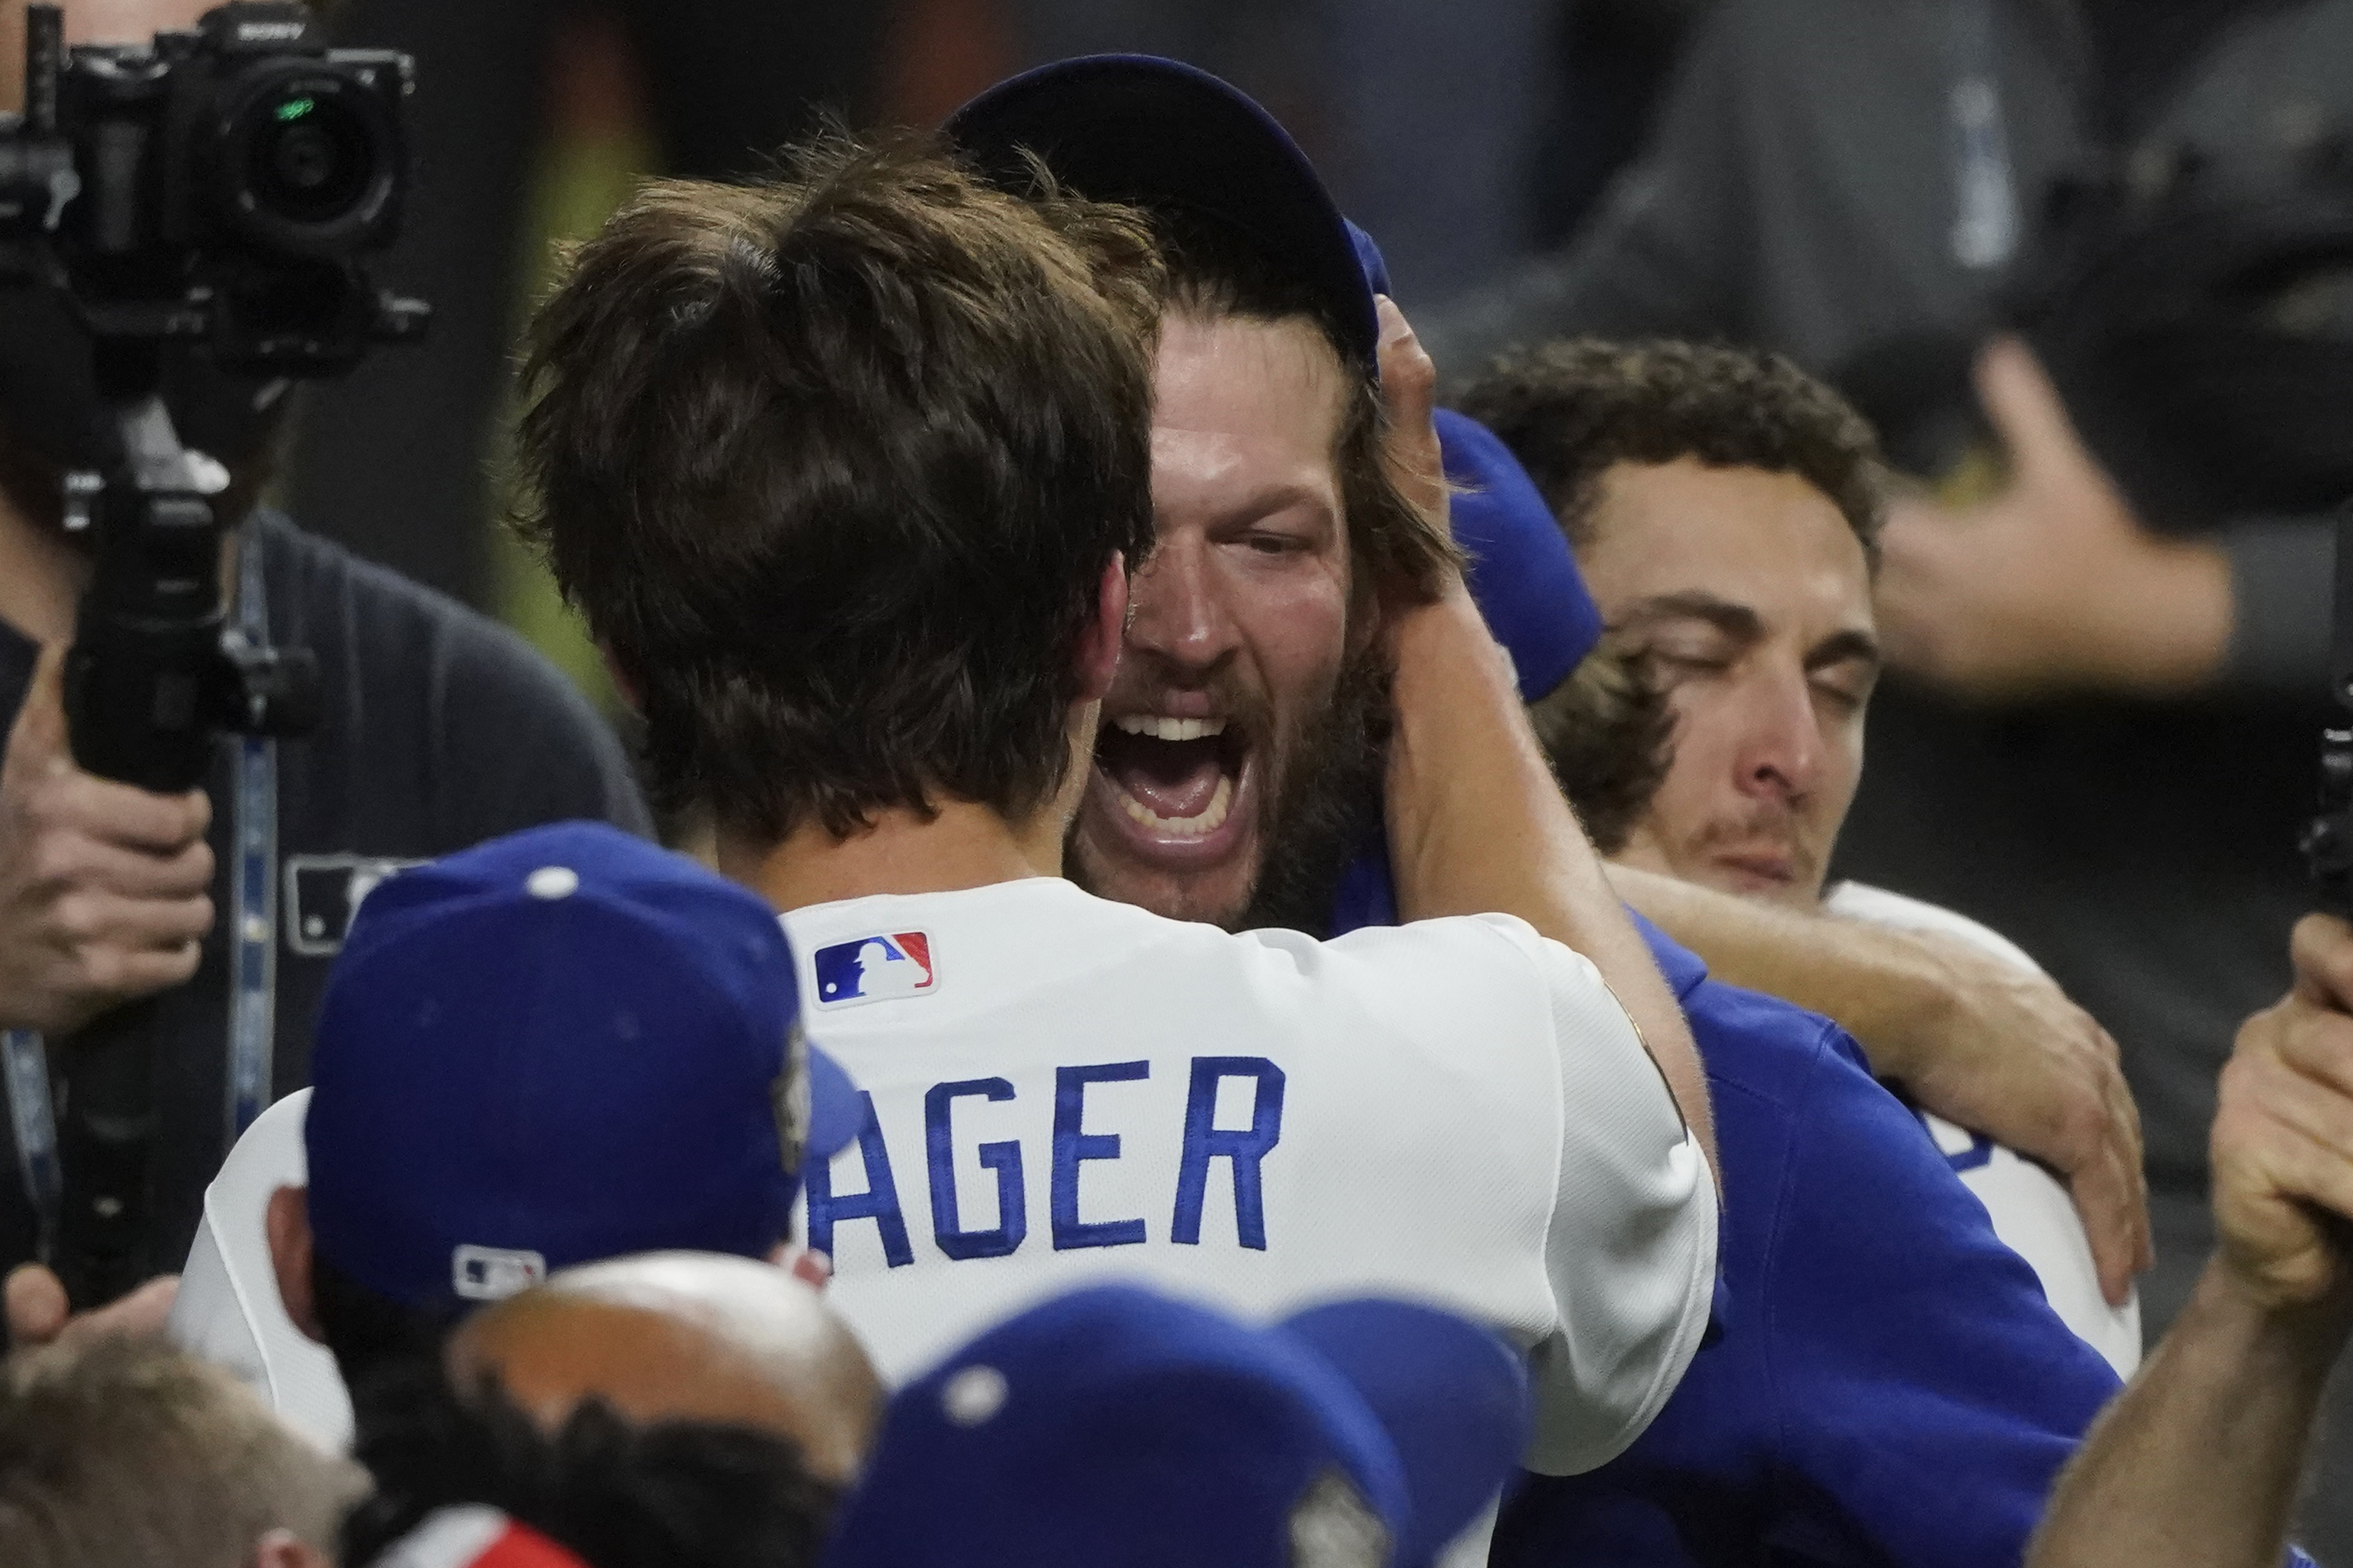 Fitting finale: Dodgers win title, Turner tests positive